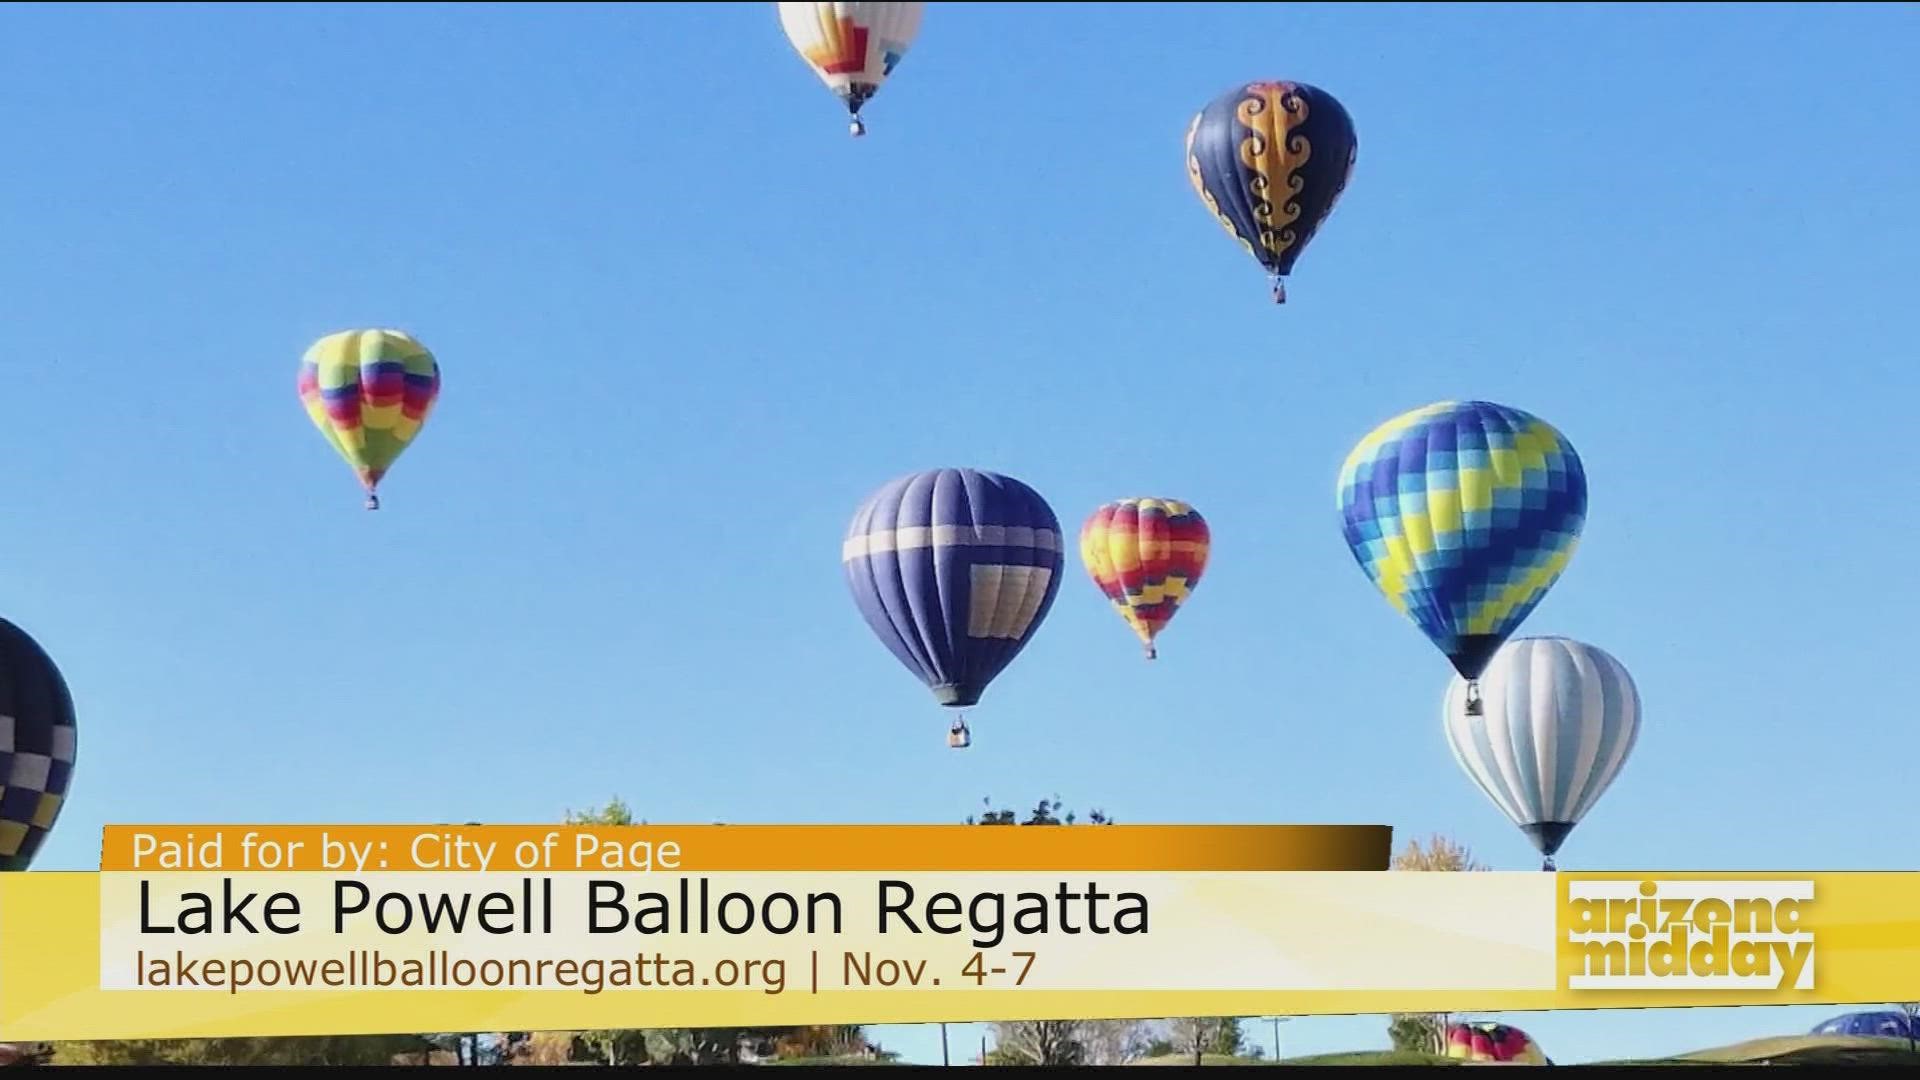 Lynn Cormier, with the City of Page, shares what this year's Lake Powell Balloon Regatta has in store plus what we can experience in Page during Fall!